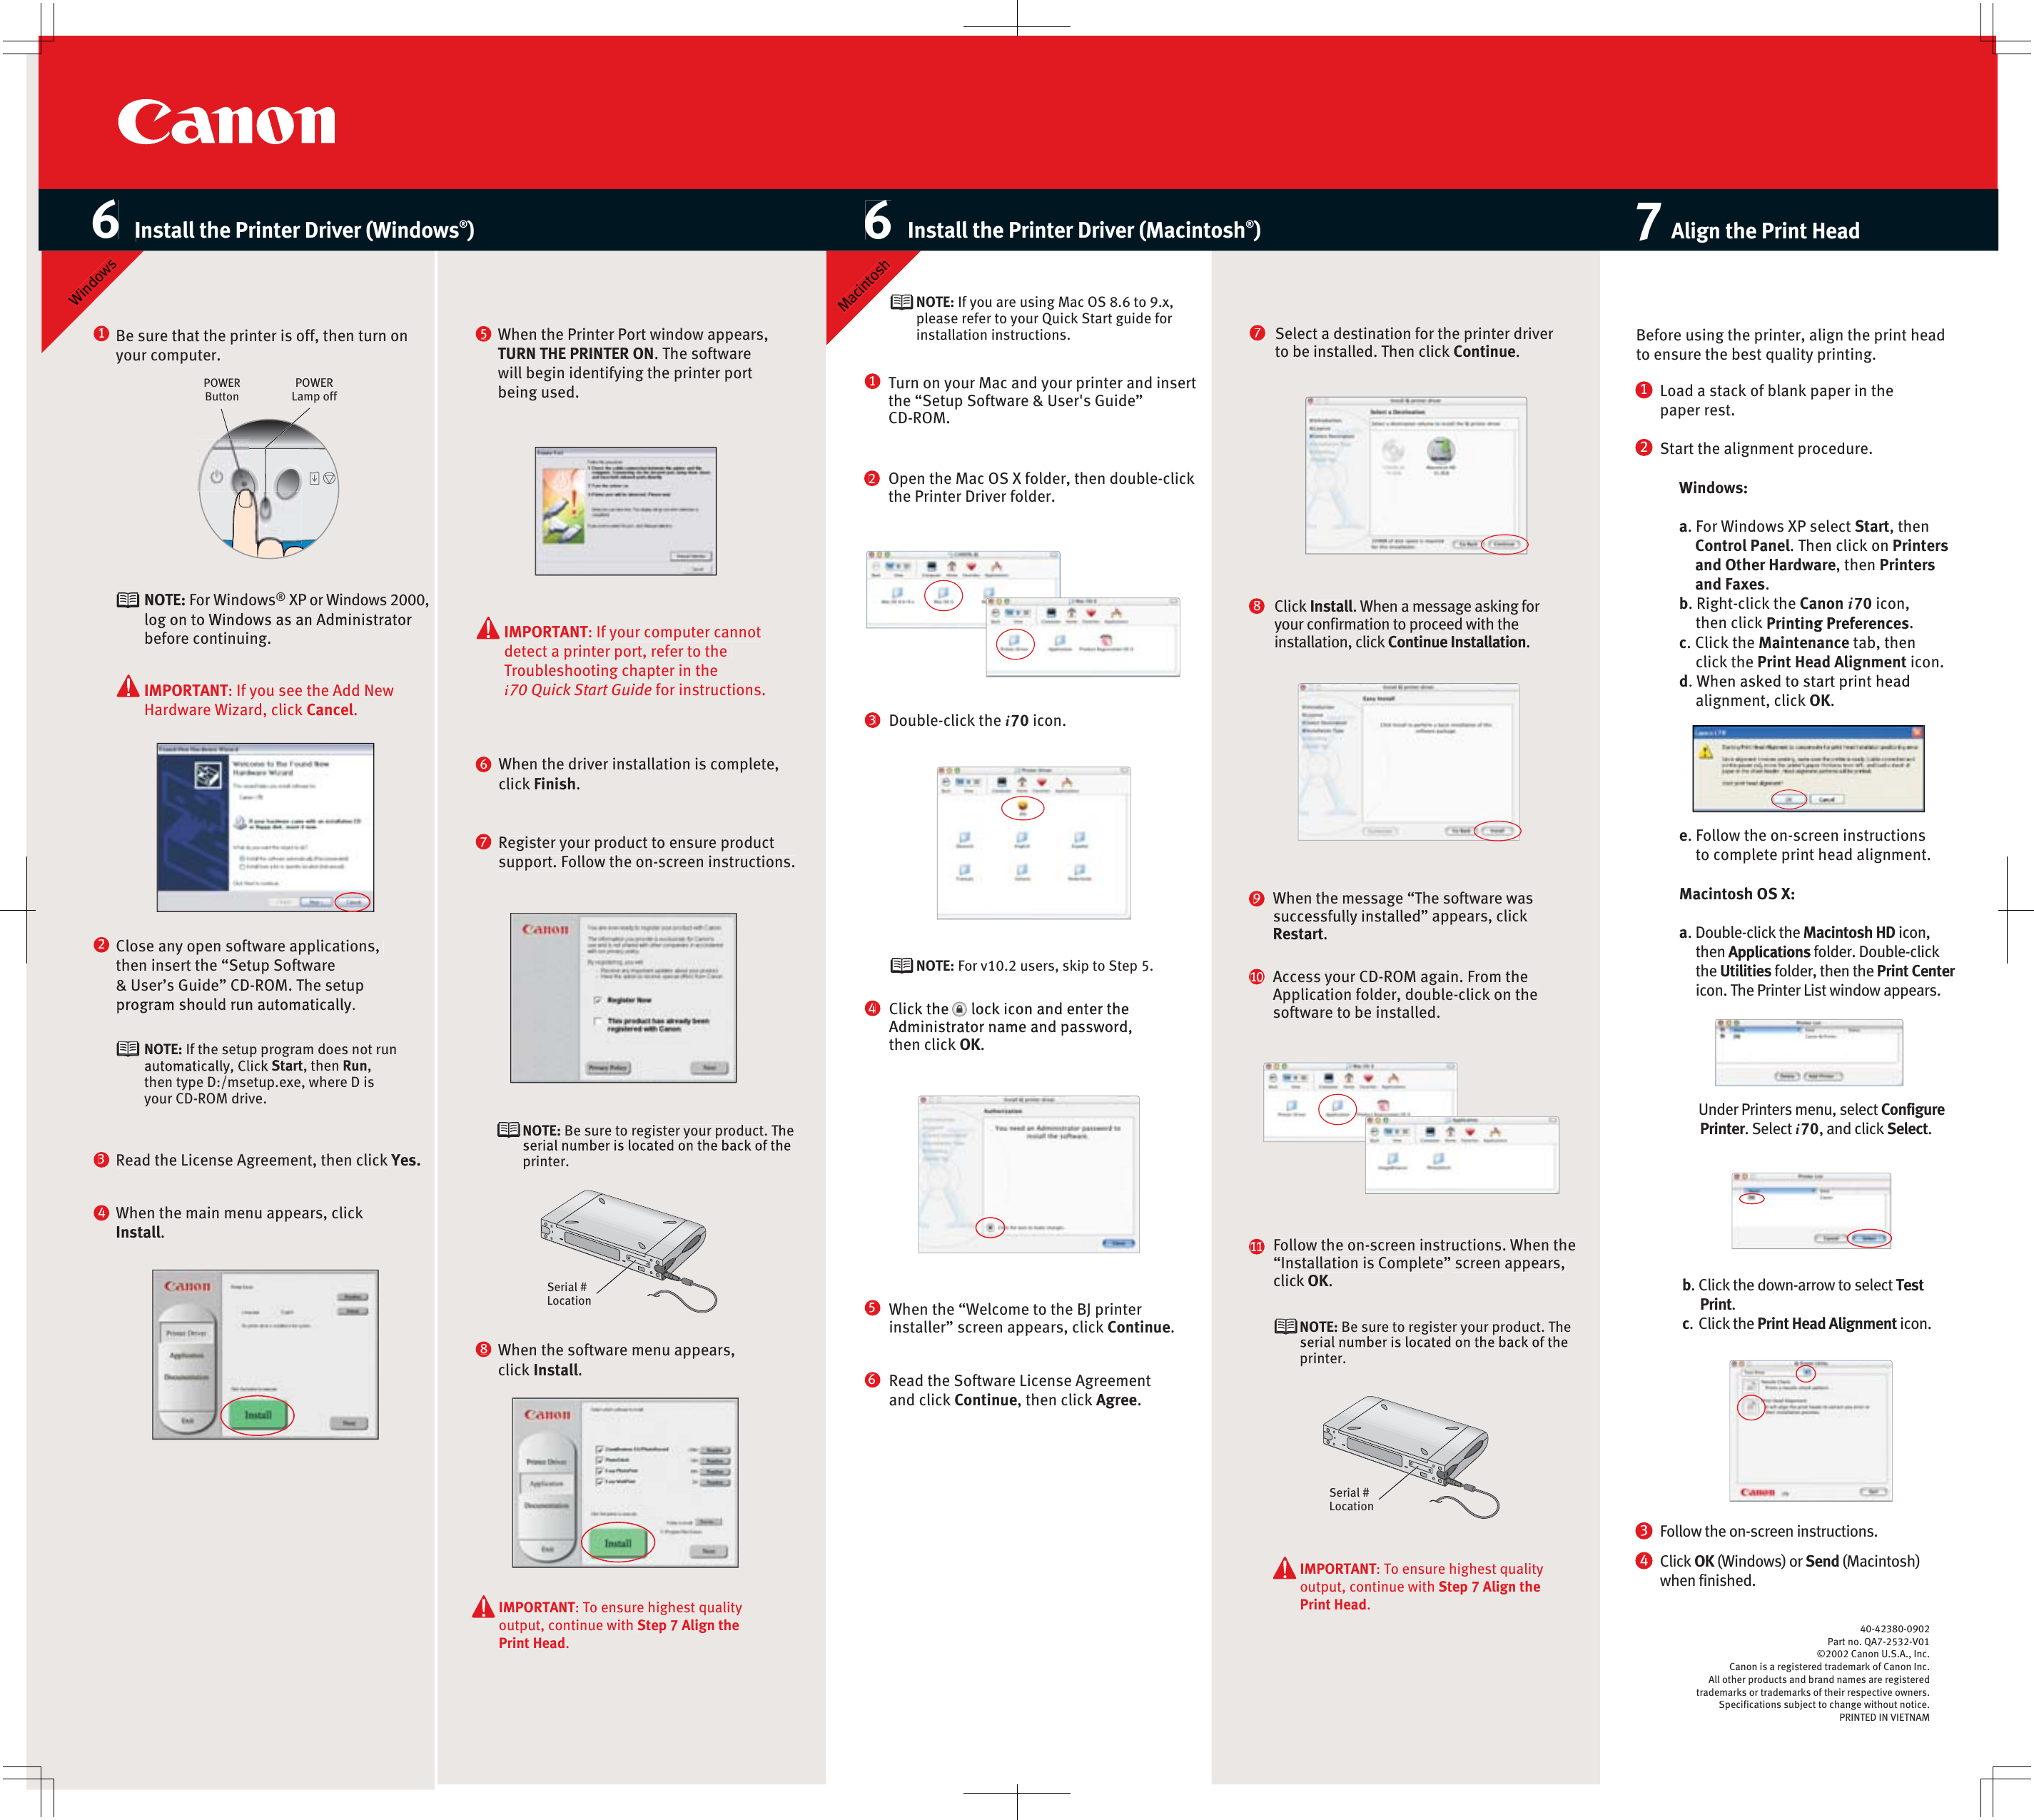 Page 2 of 2 - Canon Canon-I70-Instruction-Guide-  Canon-i70-instruction-guide